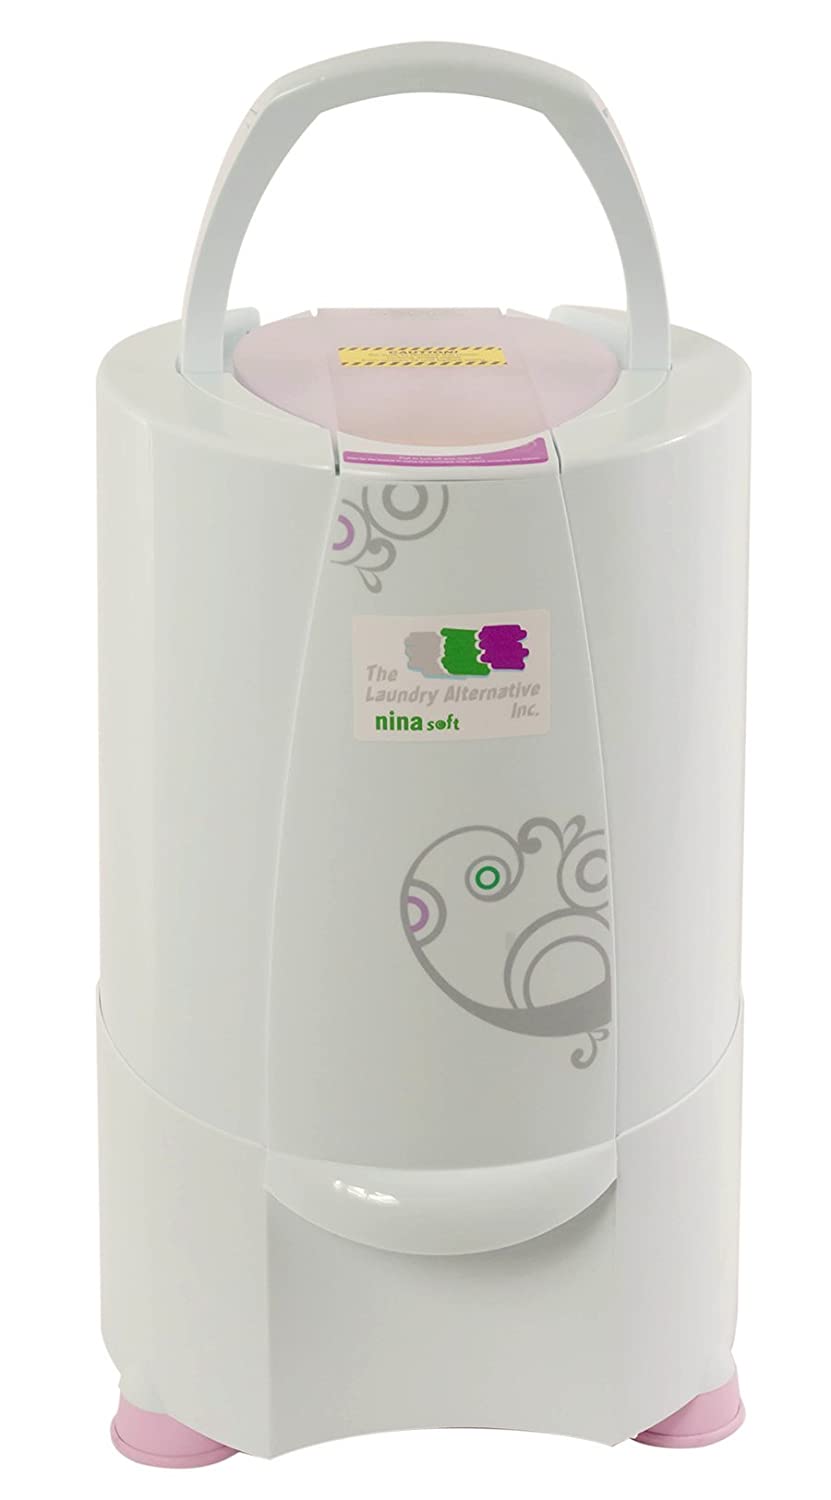 Buy The Laundry Alternative Nina Soft Spin Dryer, Ventless Portable Electric Dryer